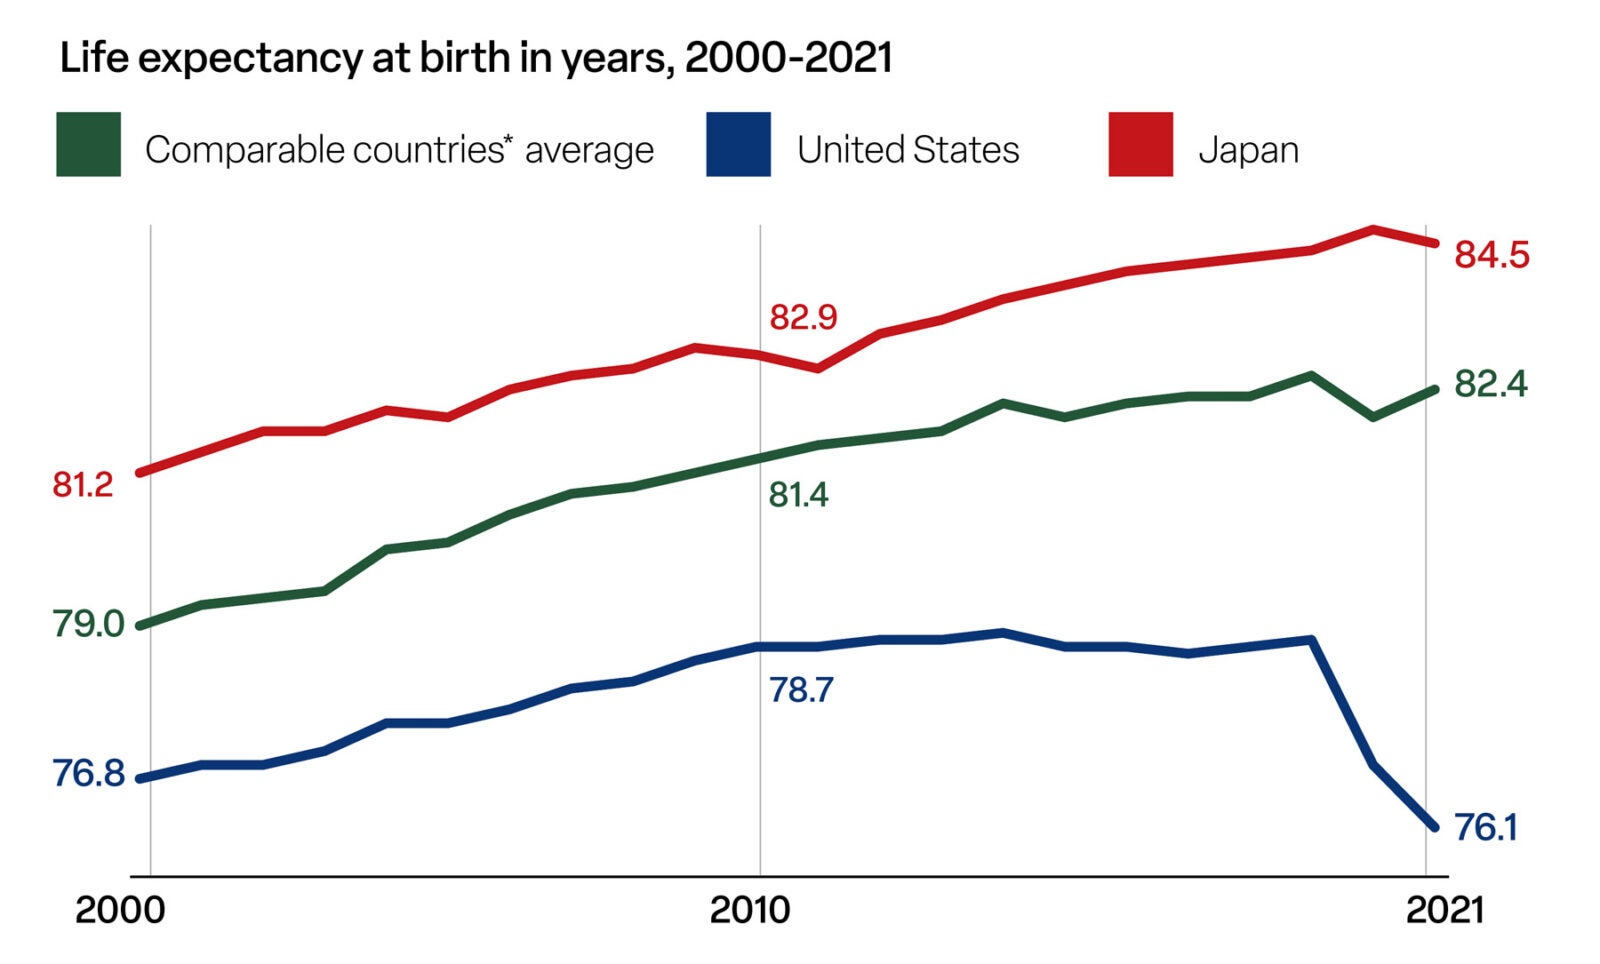 Line graph depicting "Life expectancy at birth years, 2000-2021." The chart tracks comparable countries' averages in dark green, the United States in dark blue, and Japan in red. 